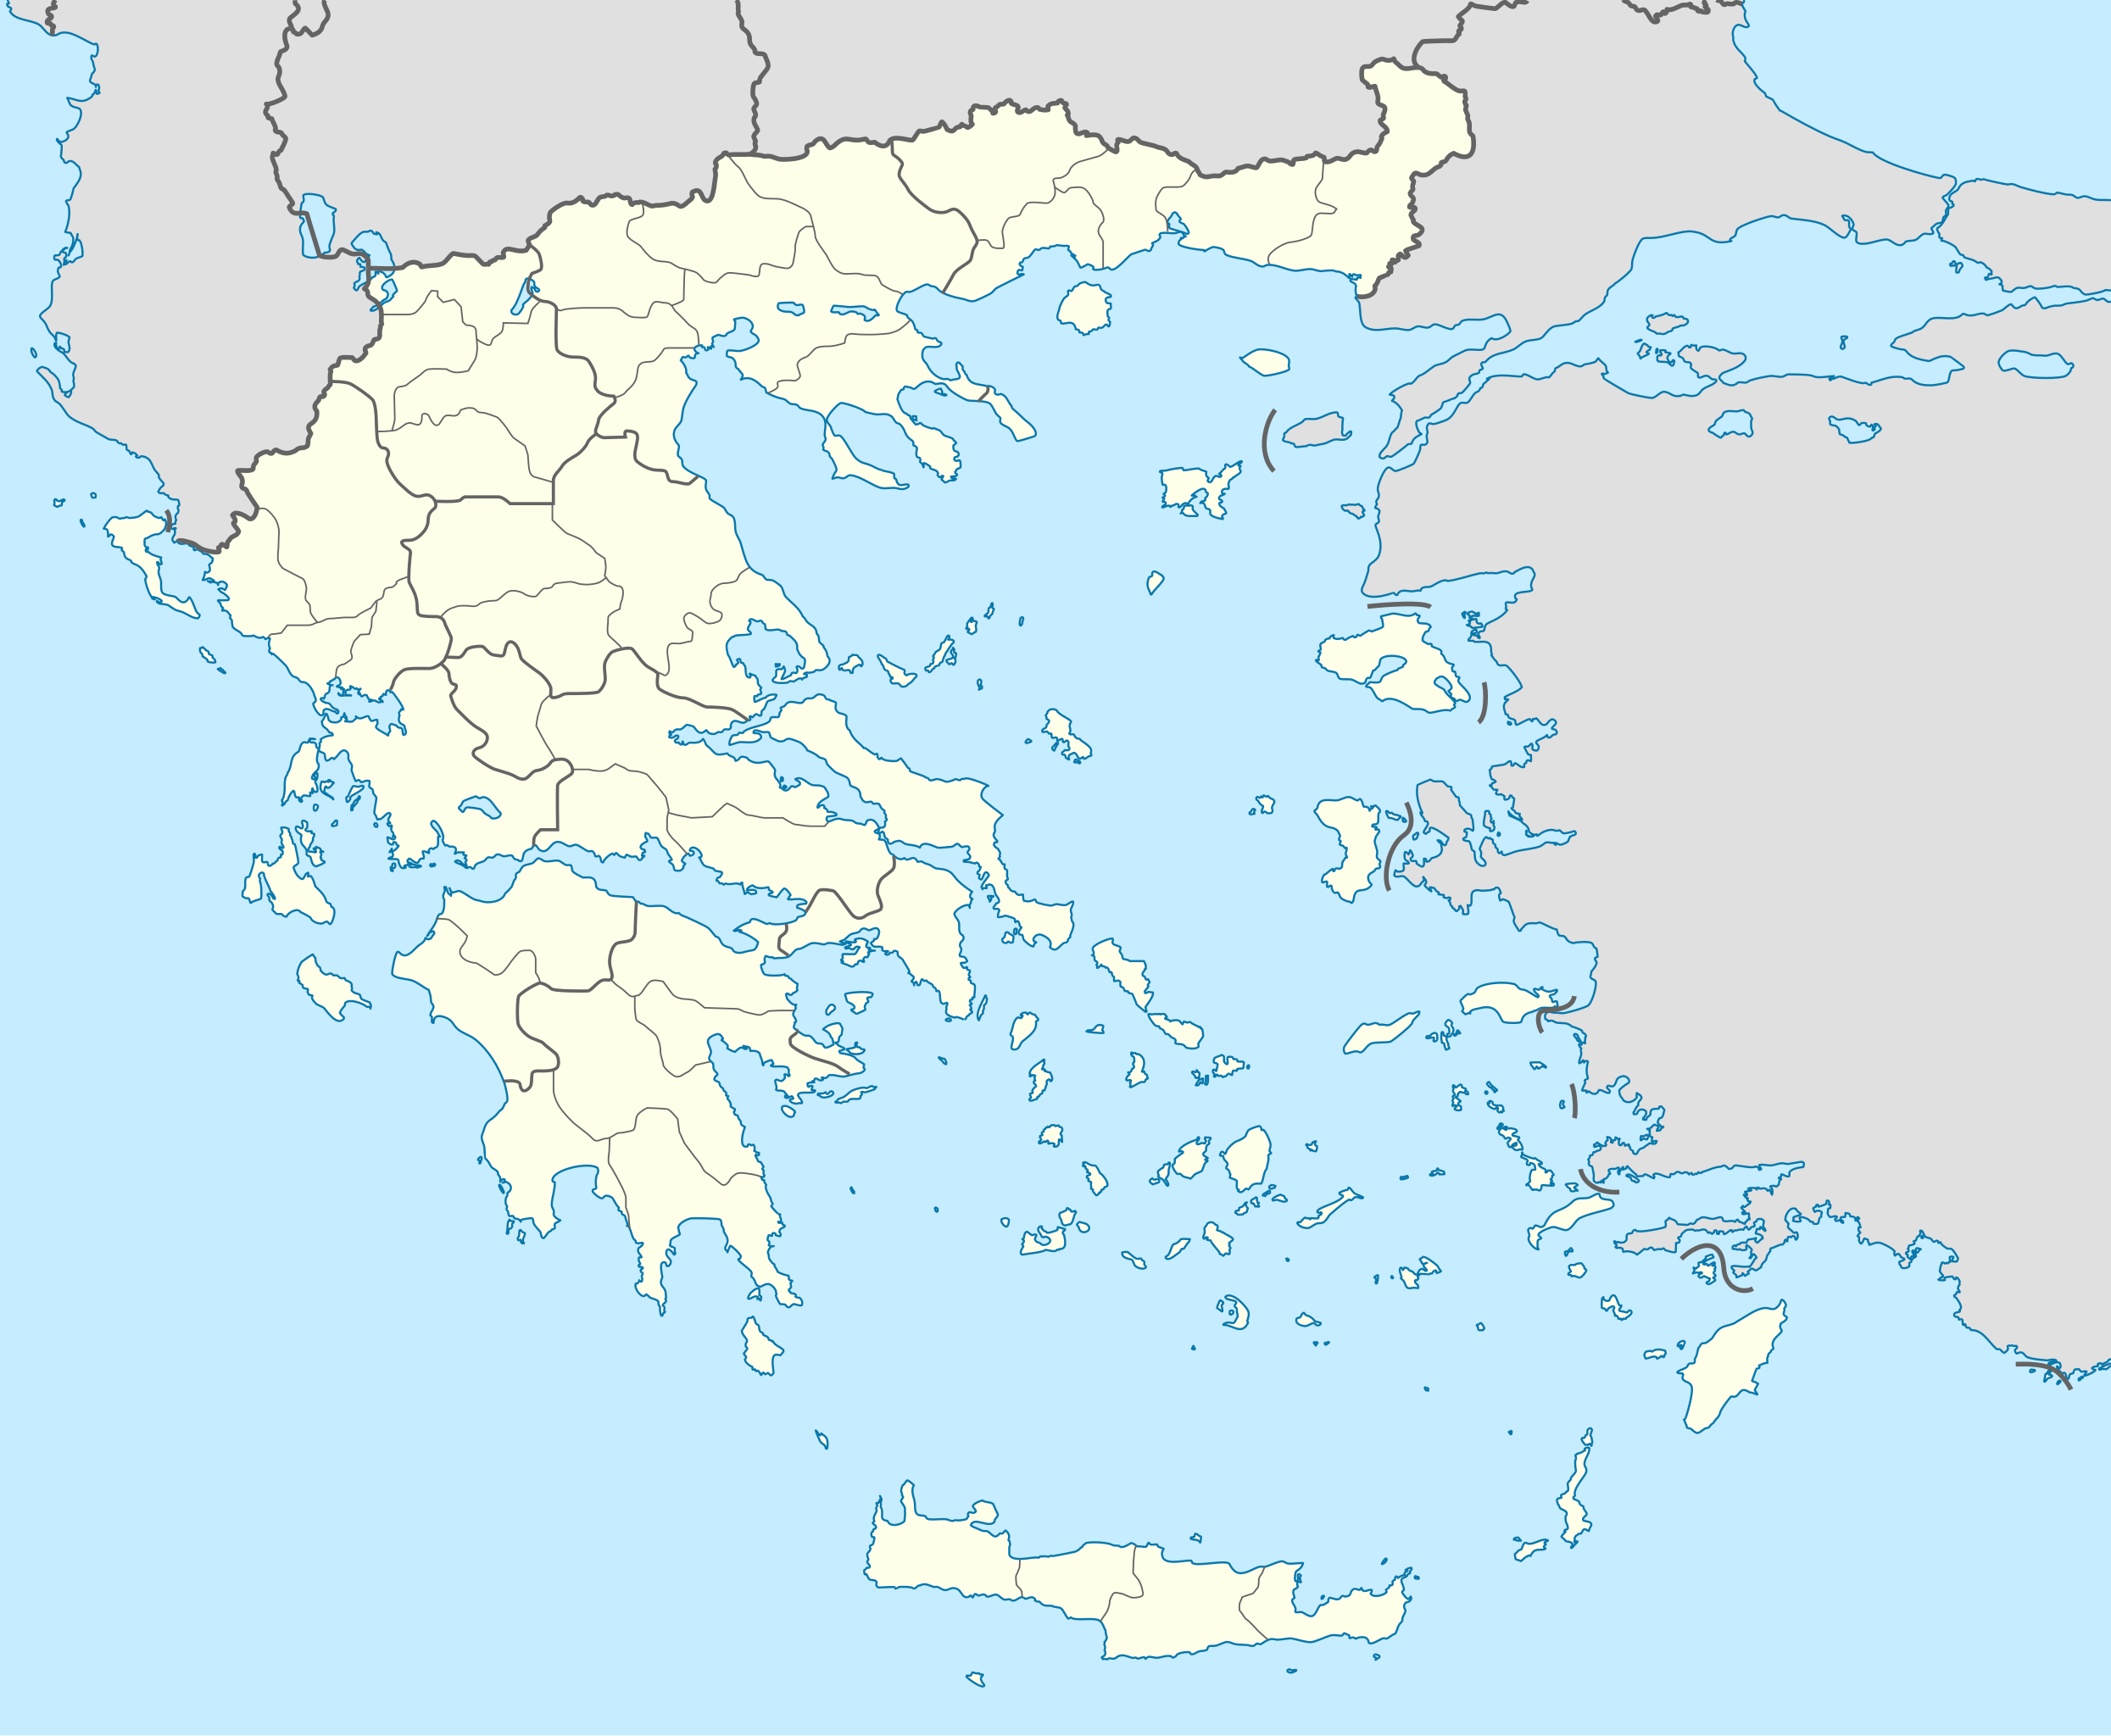 File:Greece location map.svg - Wikimedia Commons